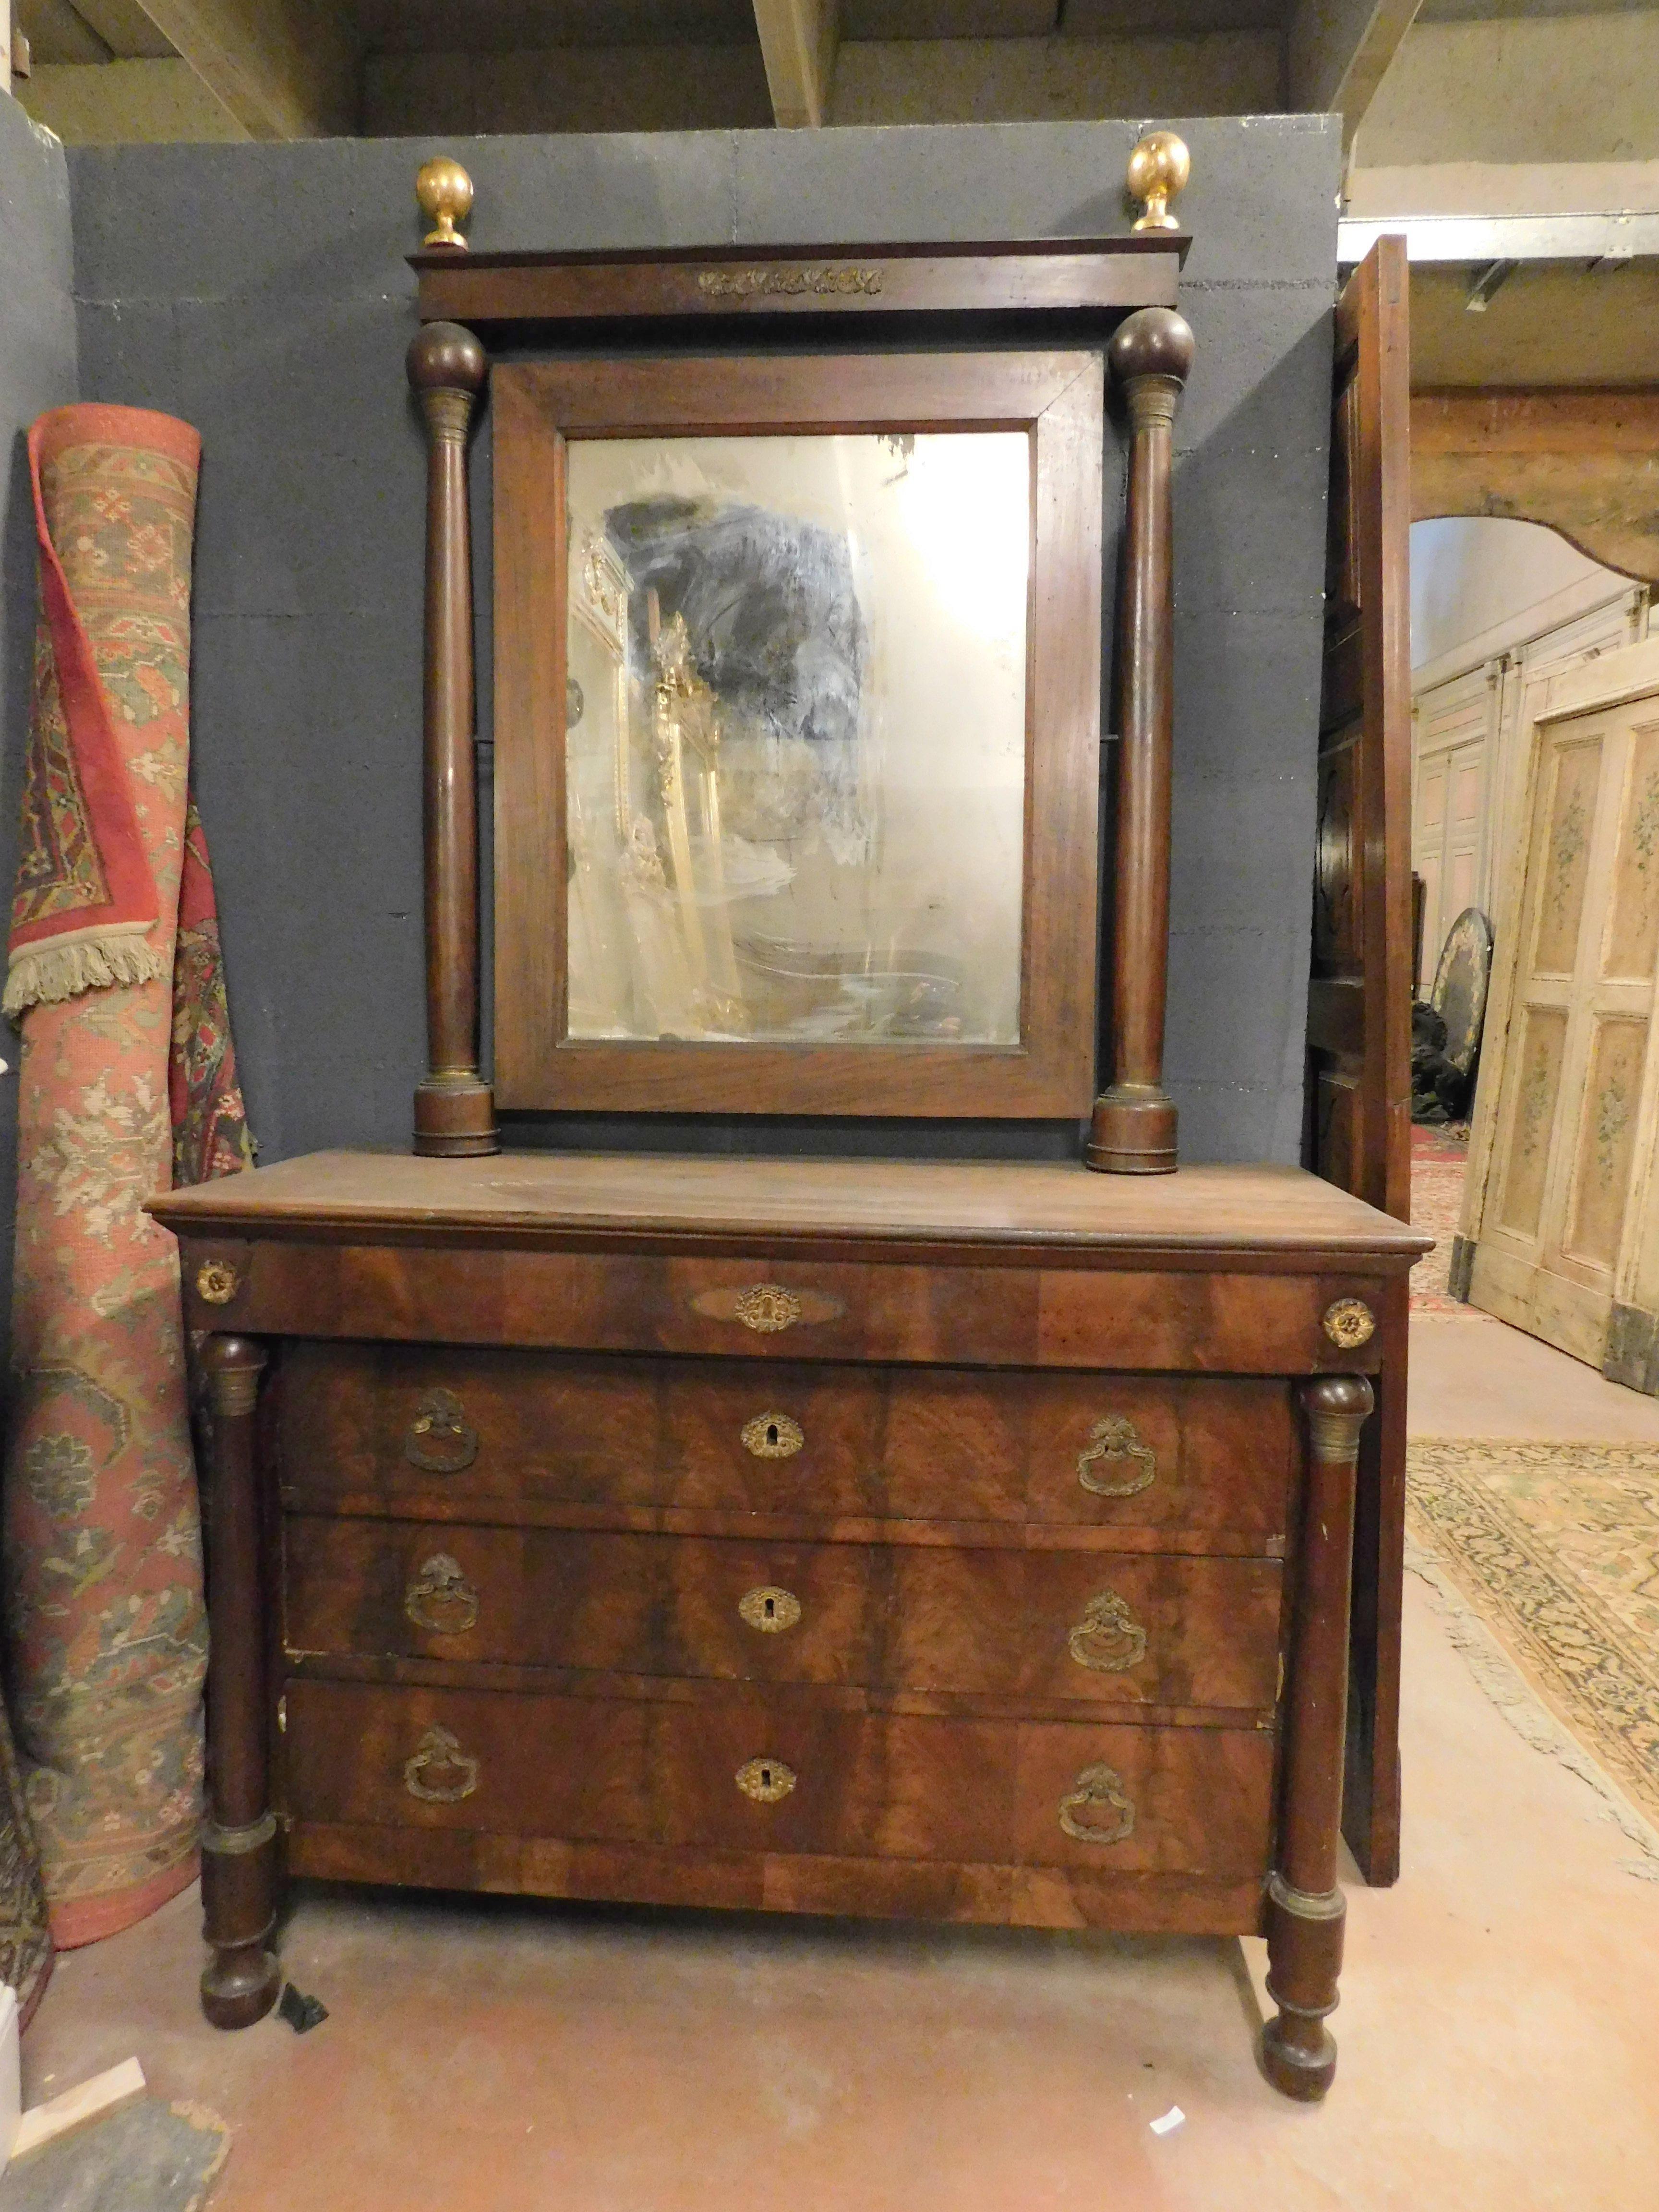 Ancient console complete with mirror and chest of drawers, built in precious veneered walnut wood, enriched with gilded bronzes, complete and original, coming from a villa in Italy from the early 19th century, measuring w 128 cm x h 219 (93 cm